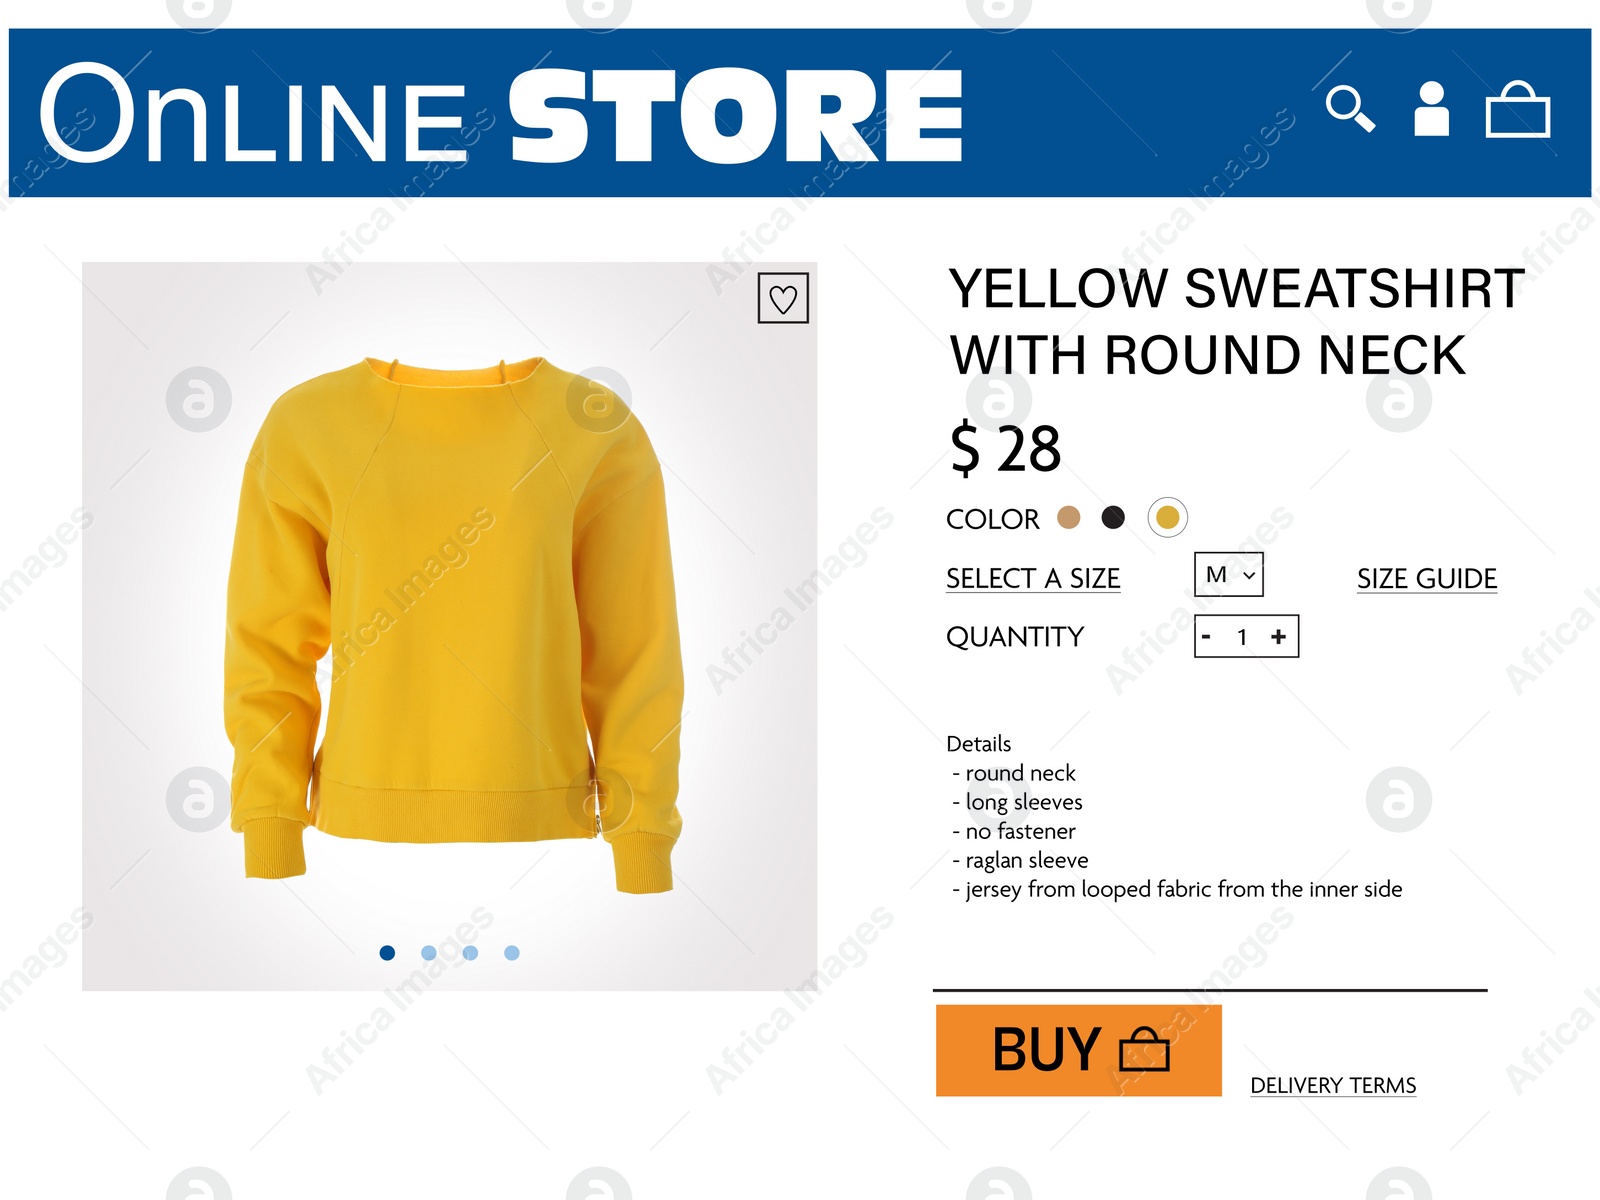 Image of Online store website page with stylish sweatshirt and information. Image can be pasted onto laptop or tablet screen